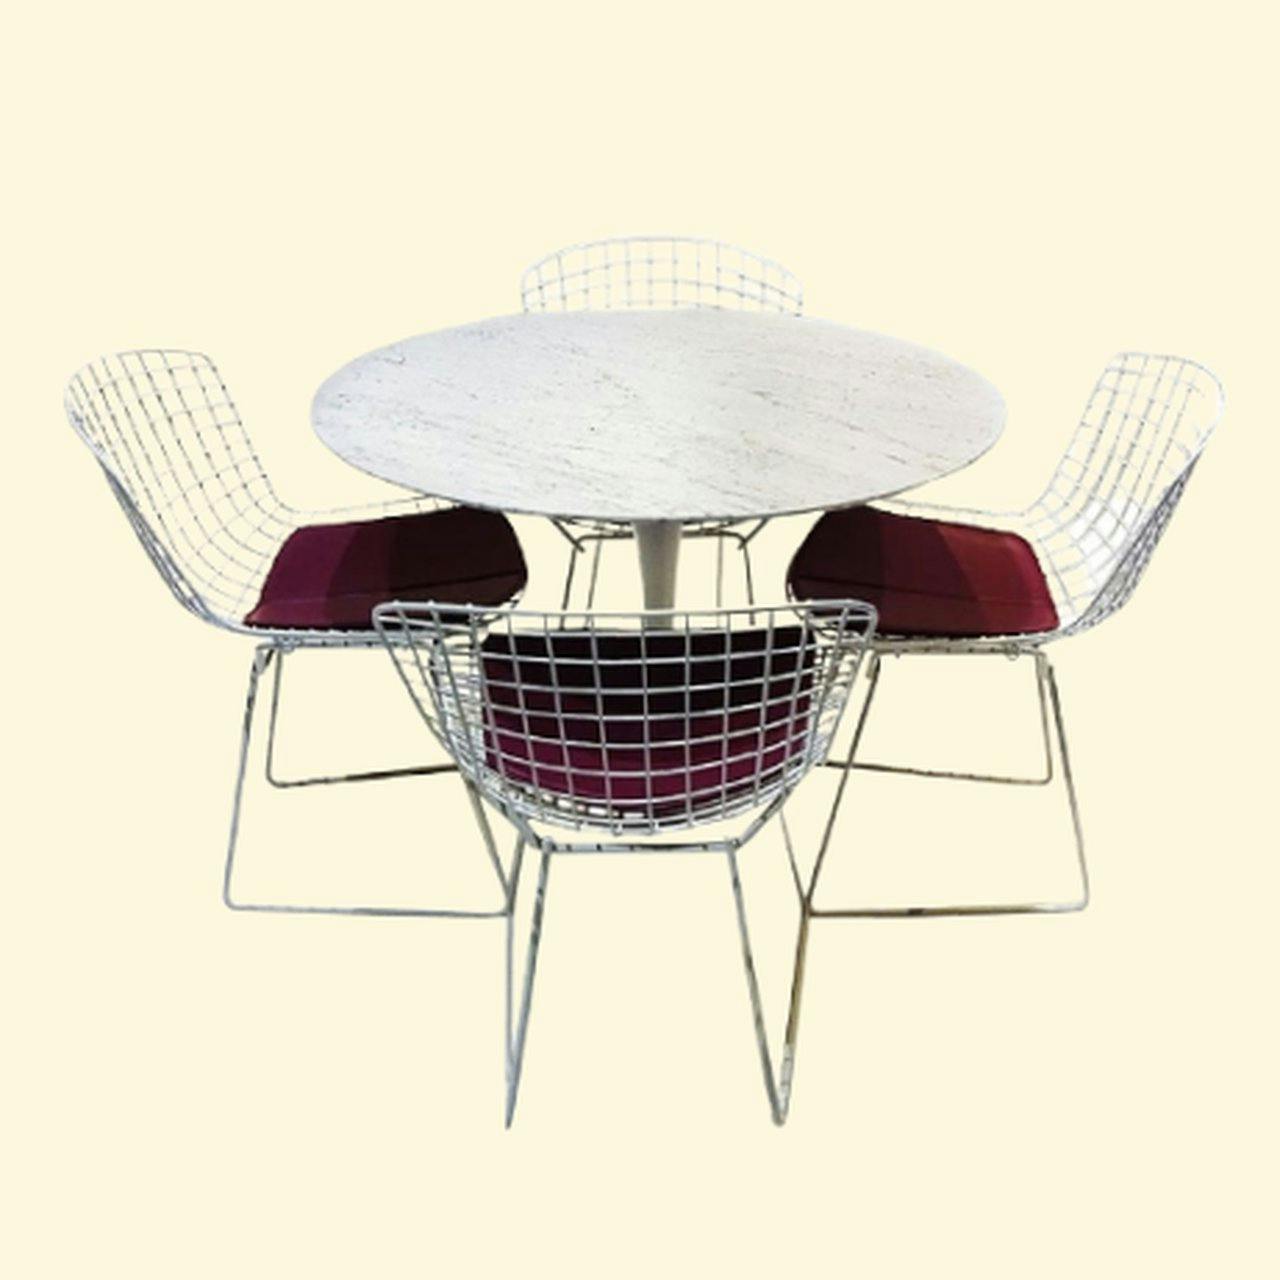 Space Age Dining set